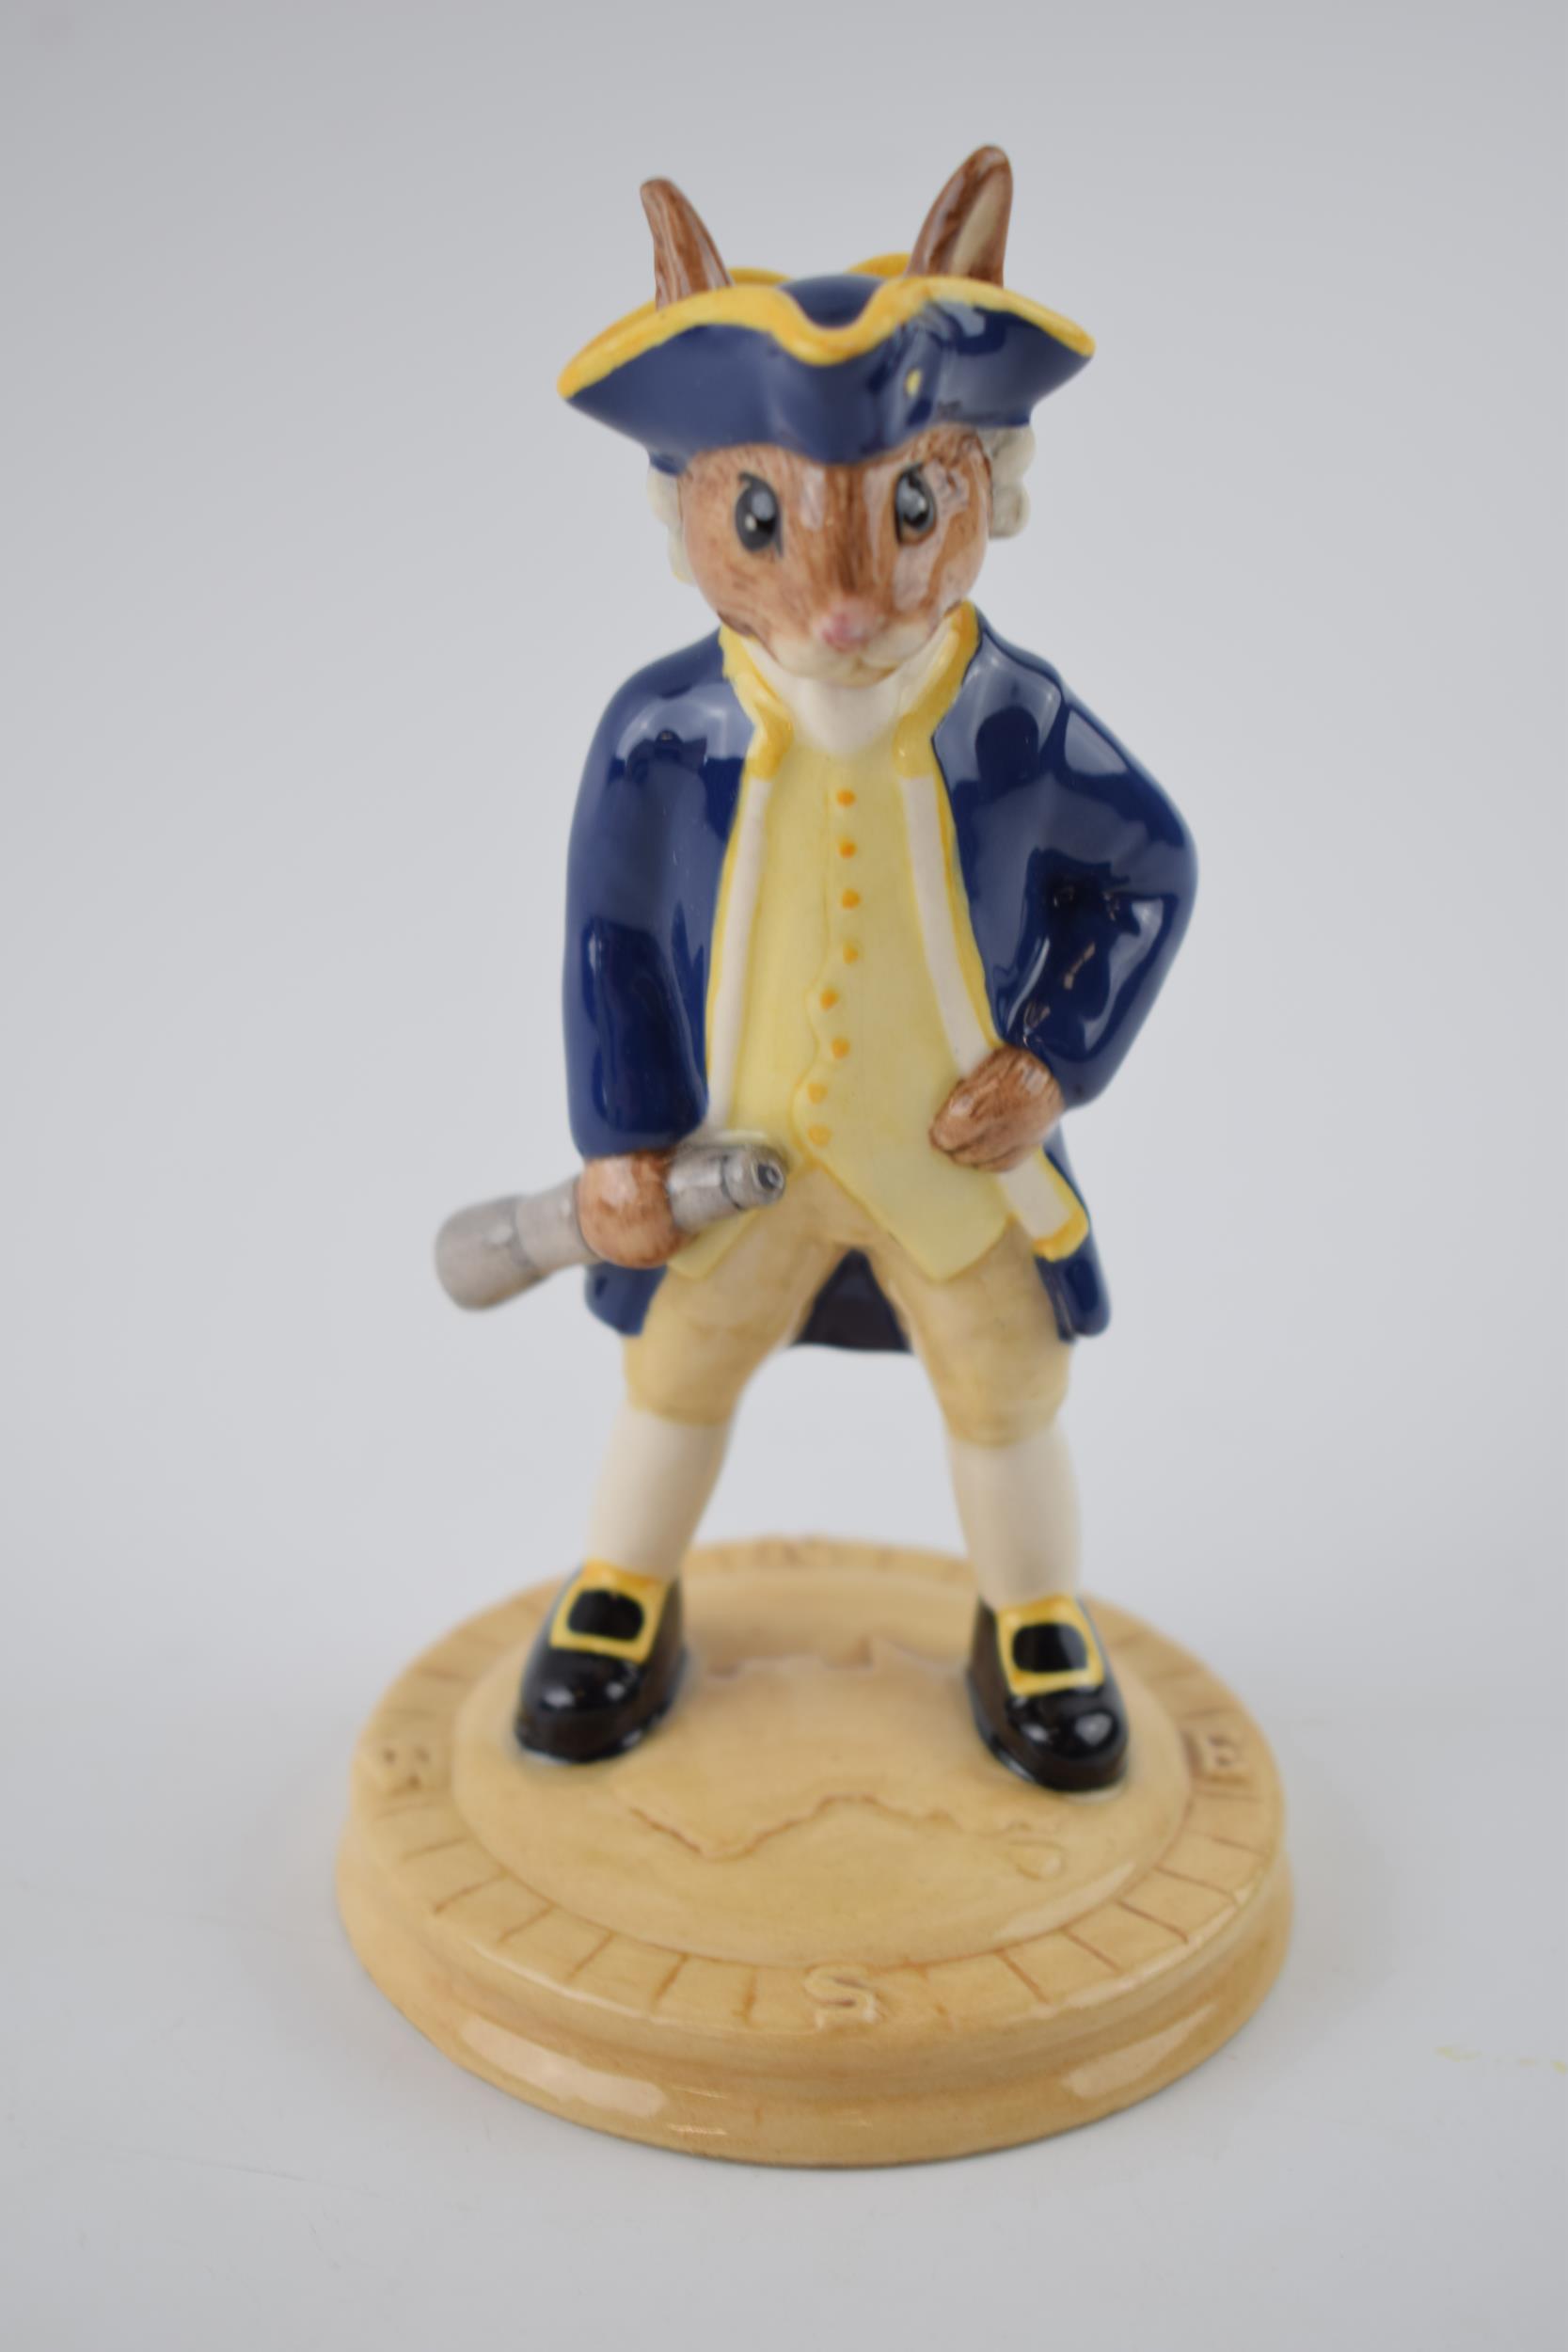 Boxed Royal Doulton Bunnykins figure Captain Cook DB251. In good condition with no obvious damage or